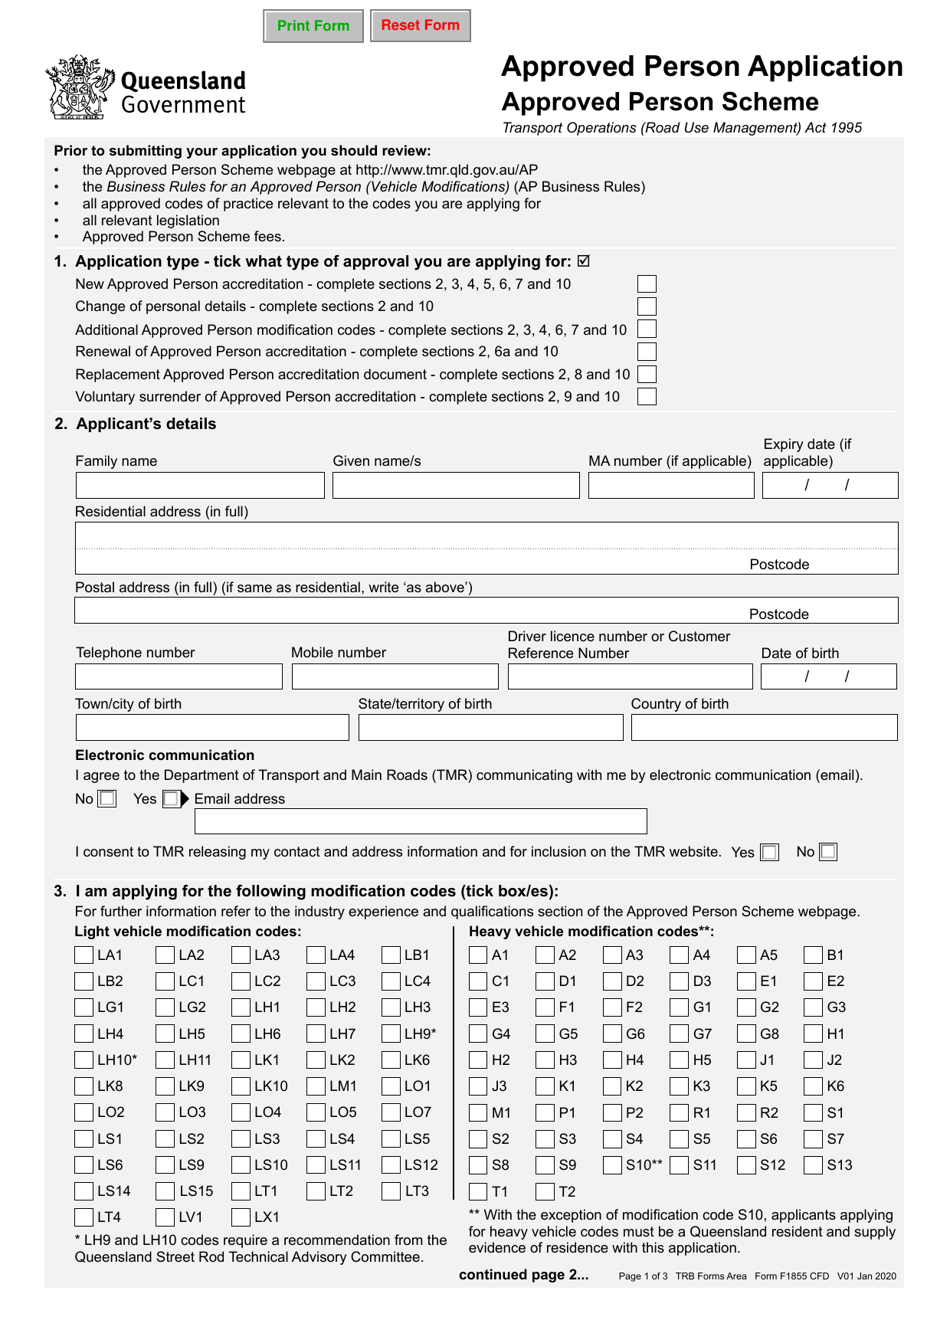 Form F1855 Approved Person Application - Queensland, Australia, Page 1